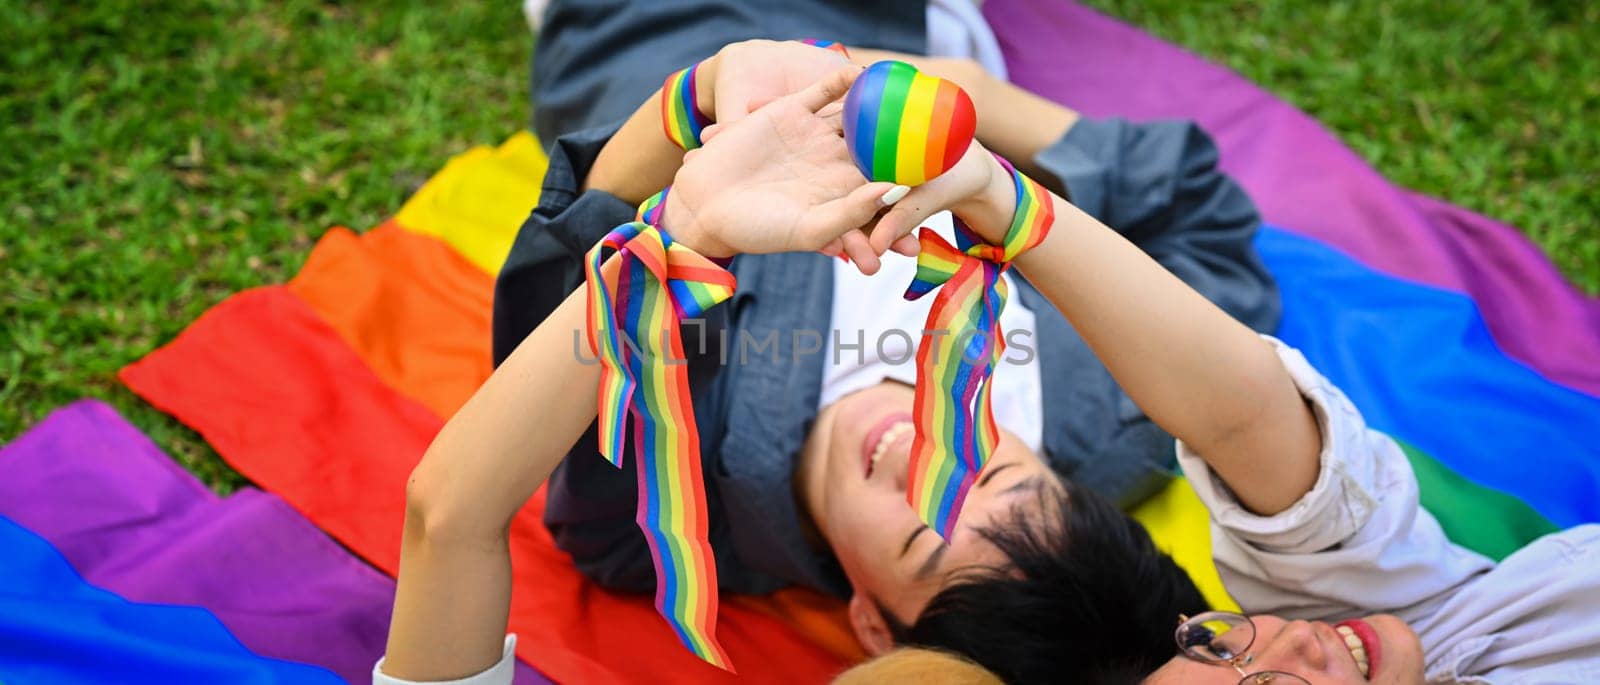 Young people lying on green grass with LGBTQ pride flag, supporting LGBTQ community and equality social by prathanchorruangsak